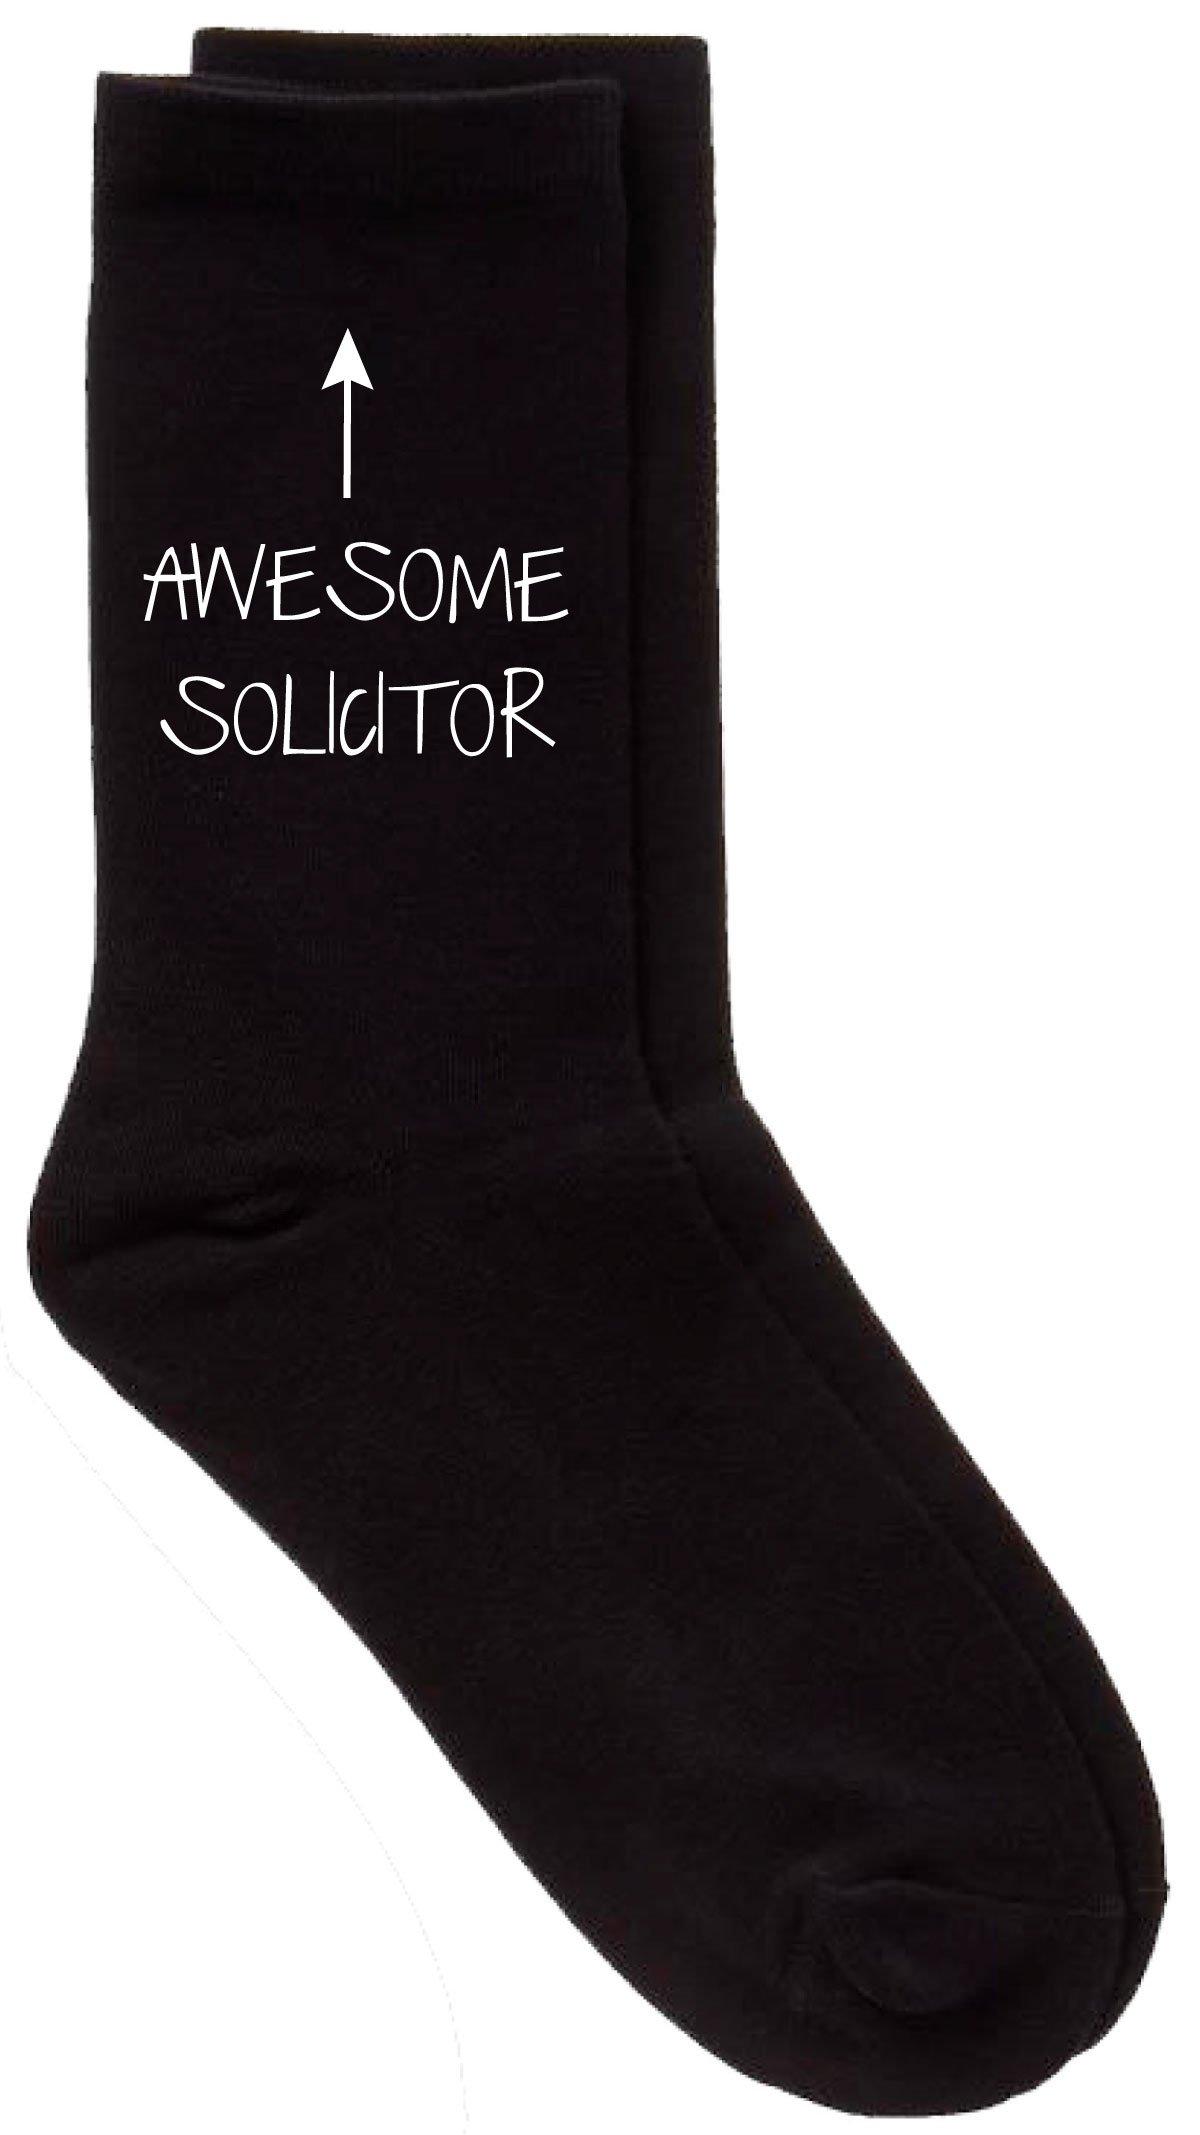 Awesome Solicitor Black Calf Socks